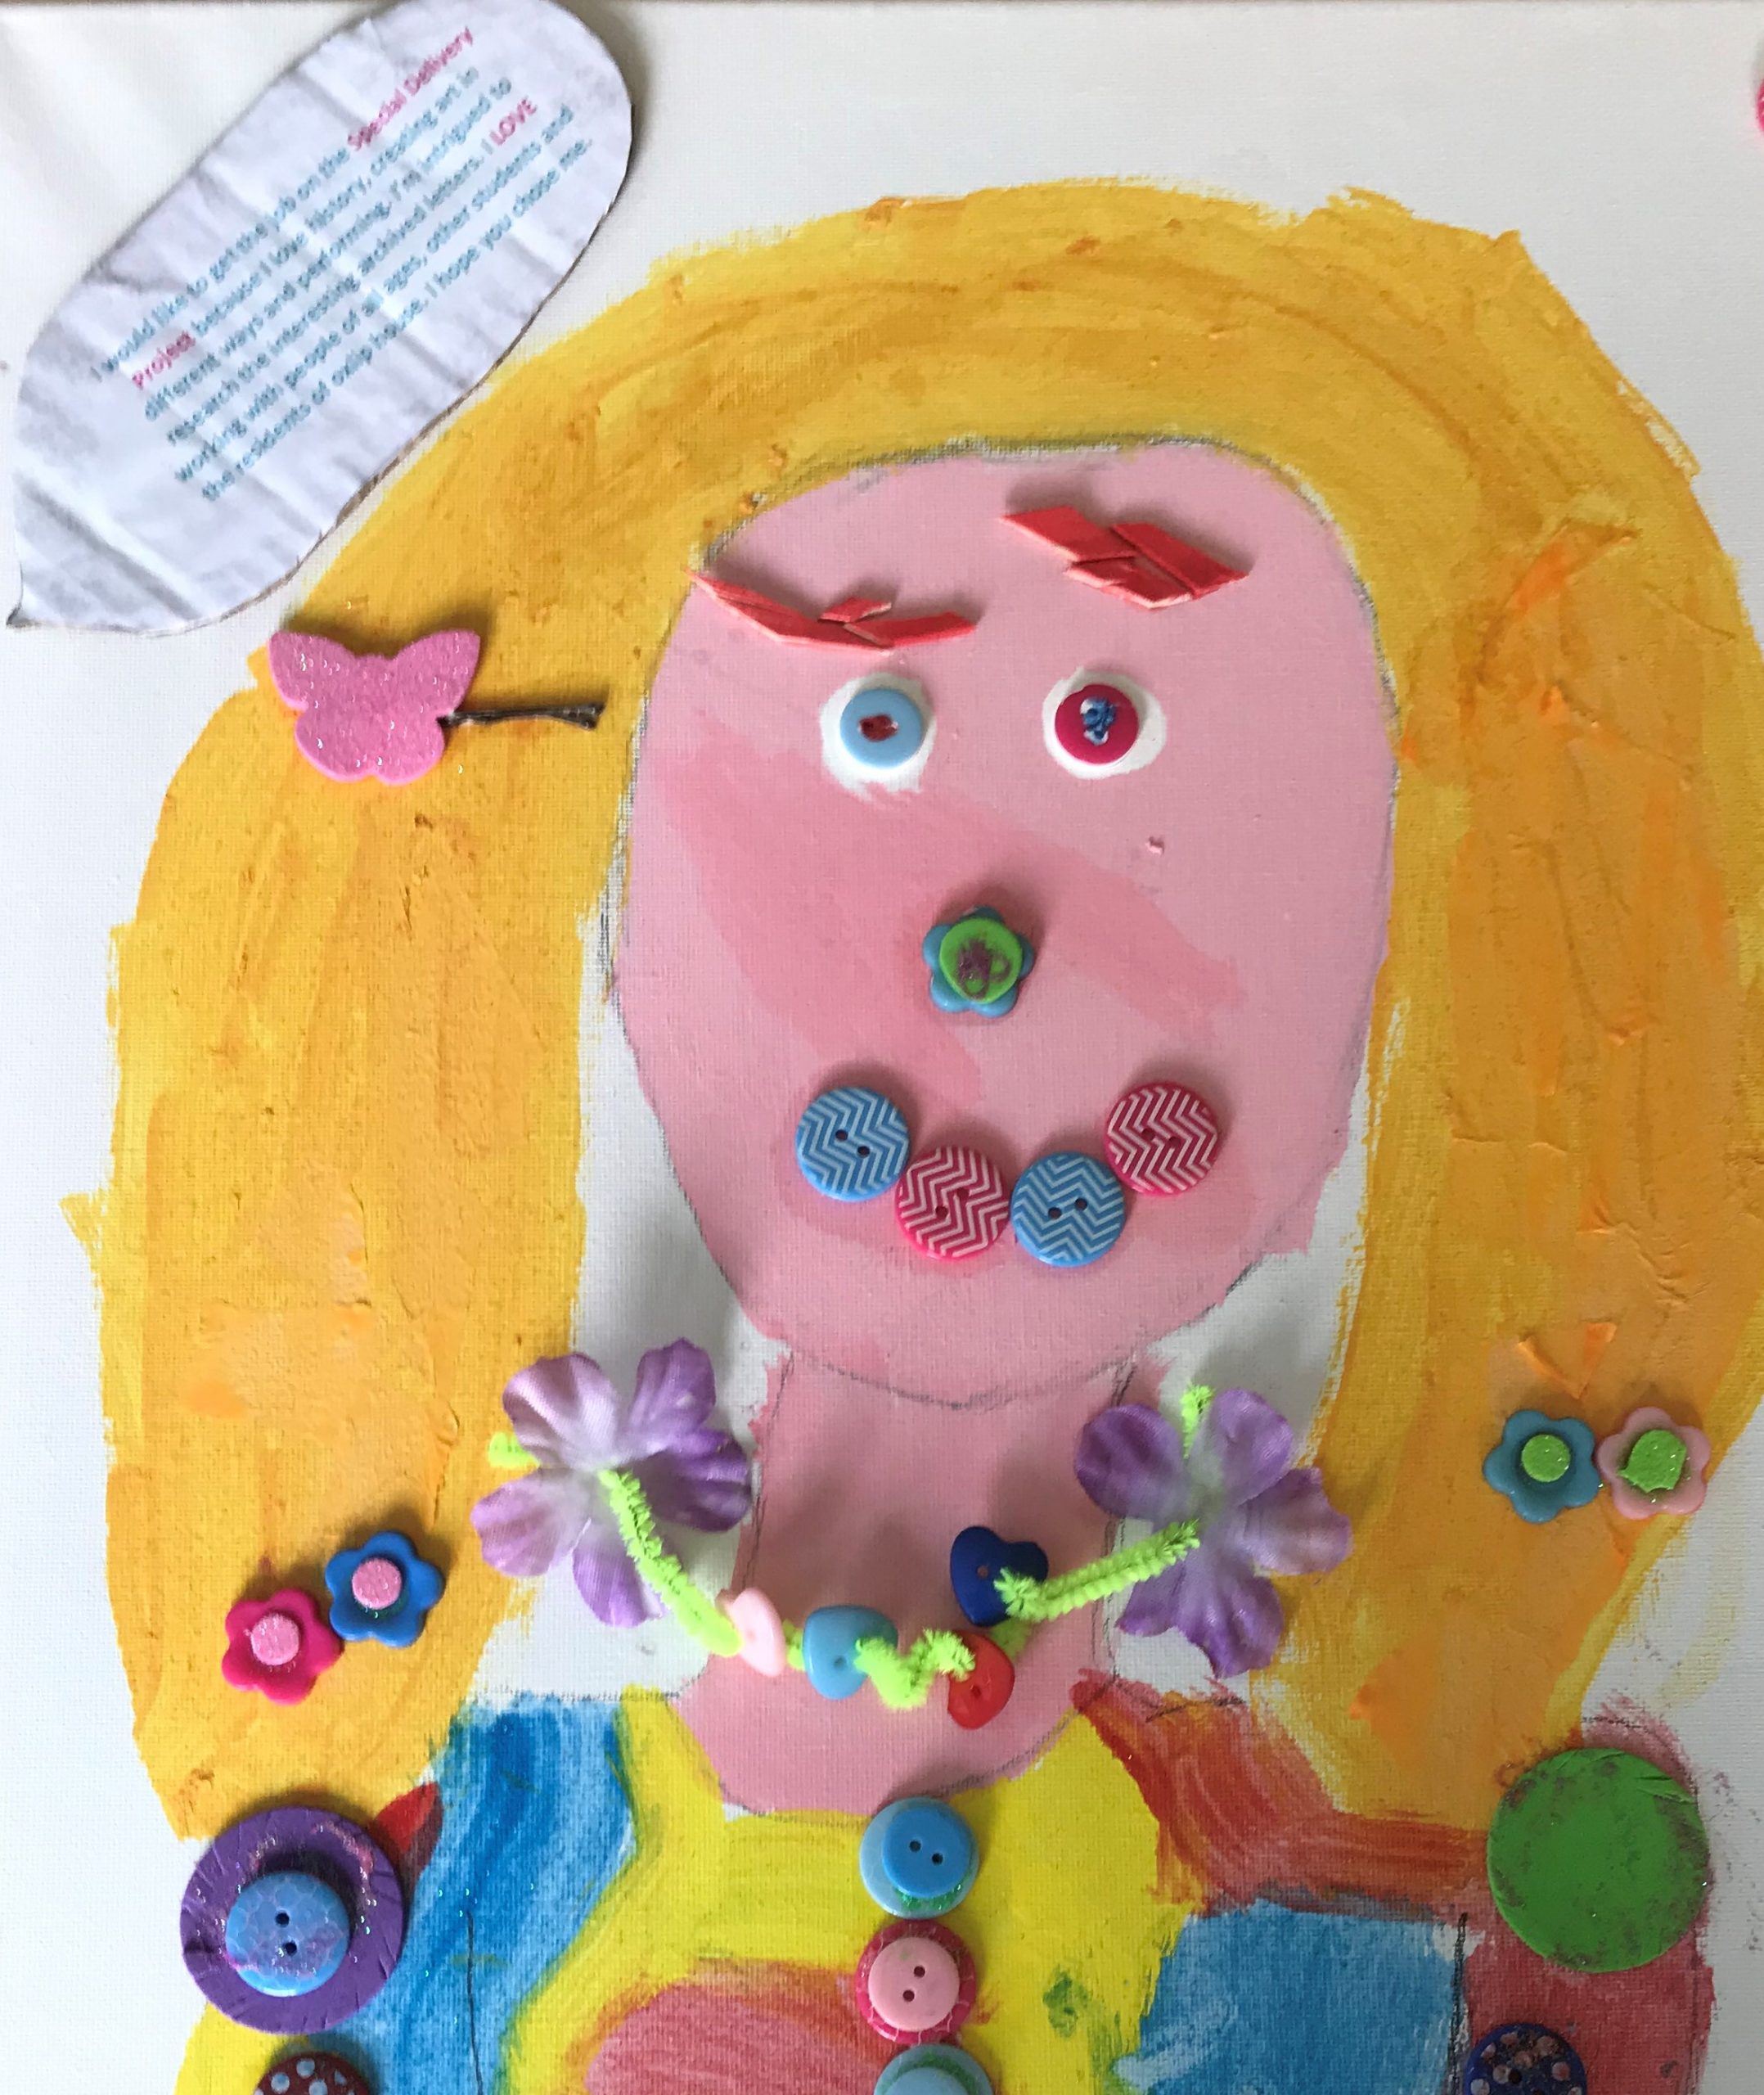 A brightly painted picture of a child's face, decorated with buttons